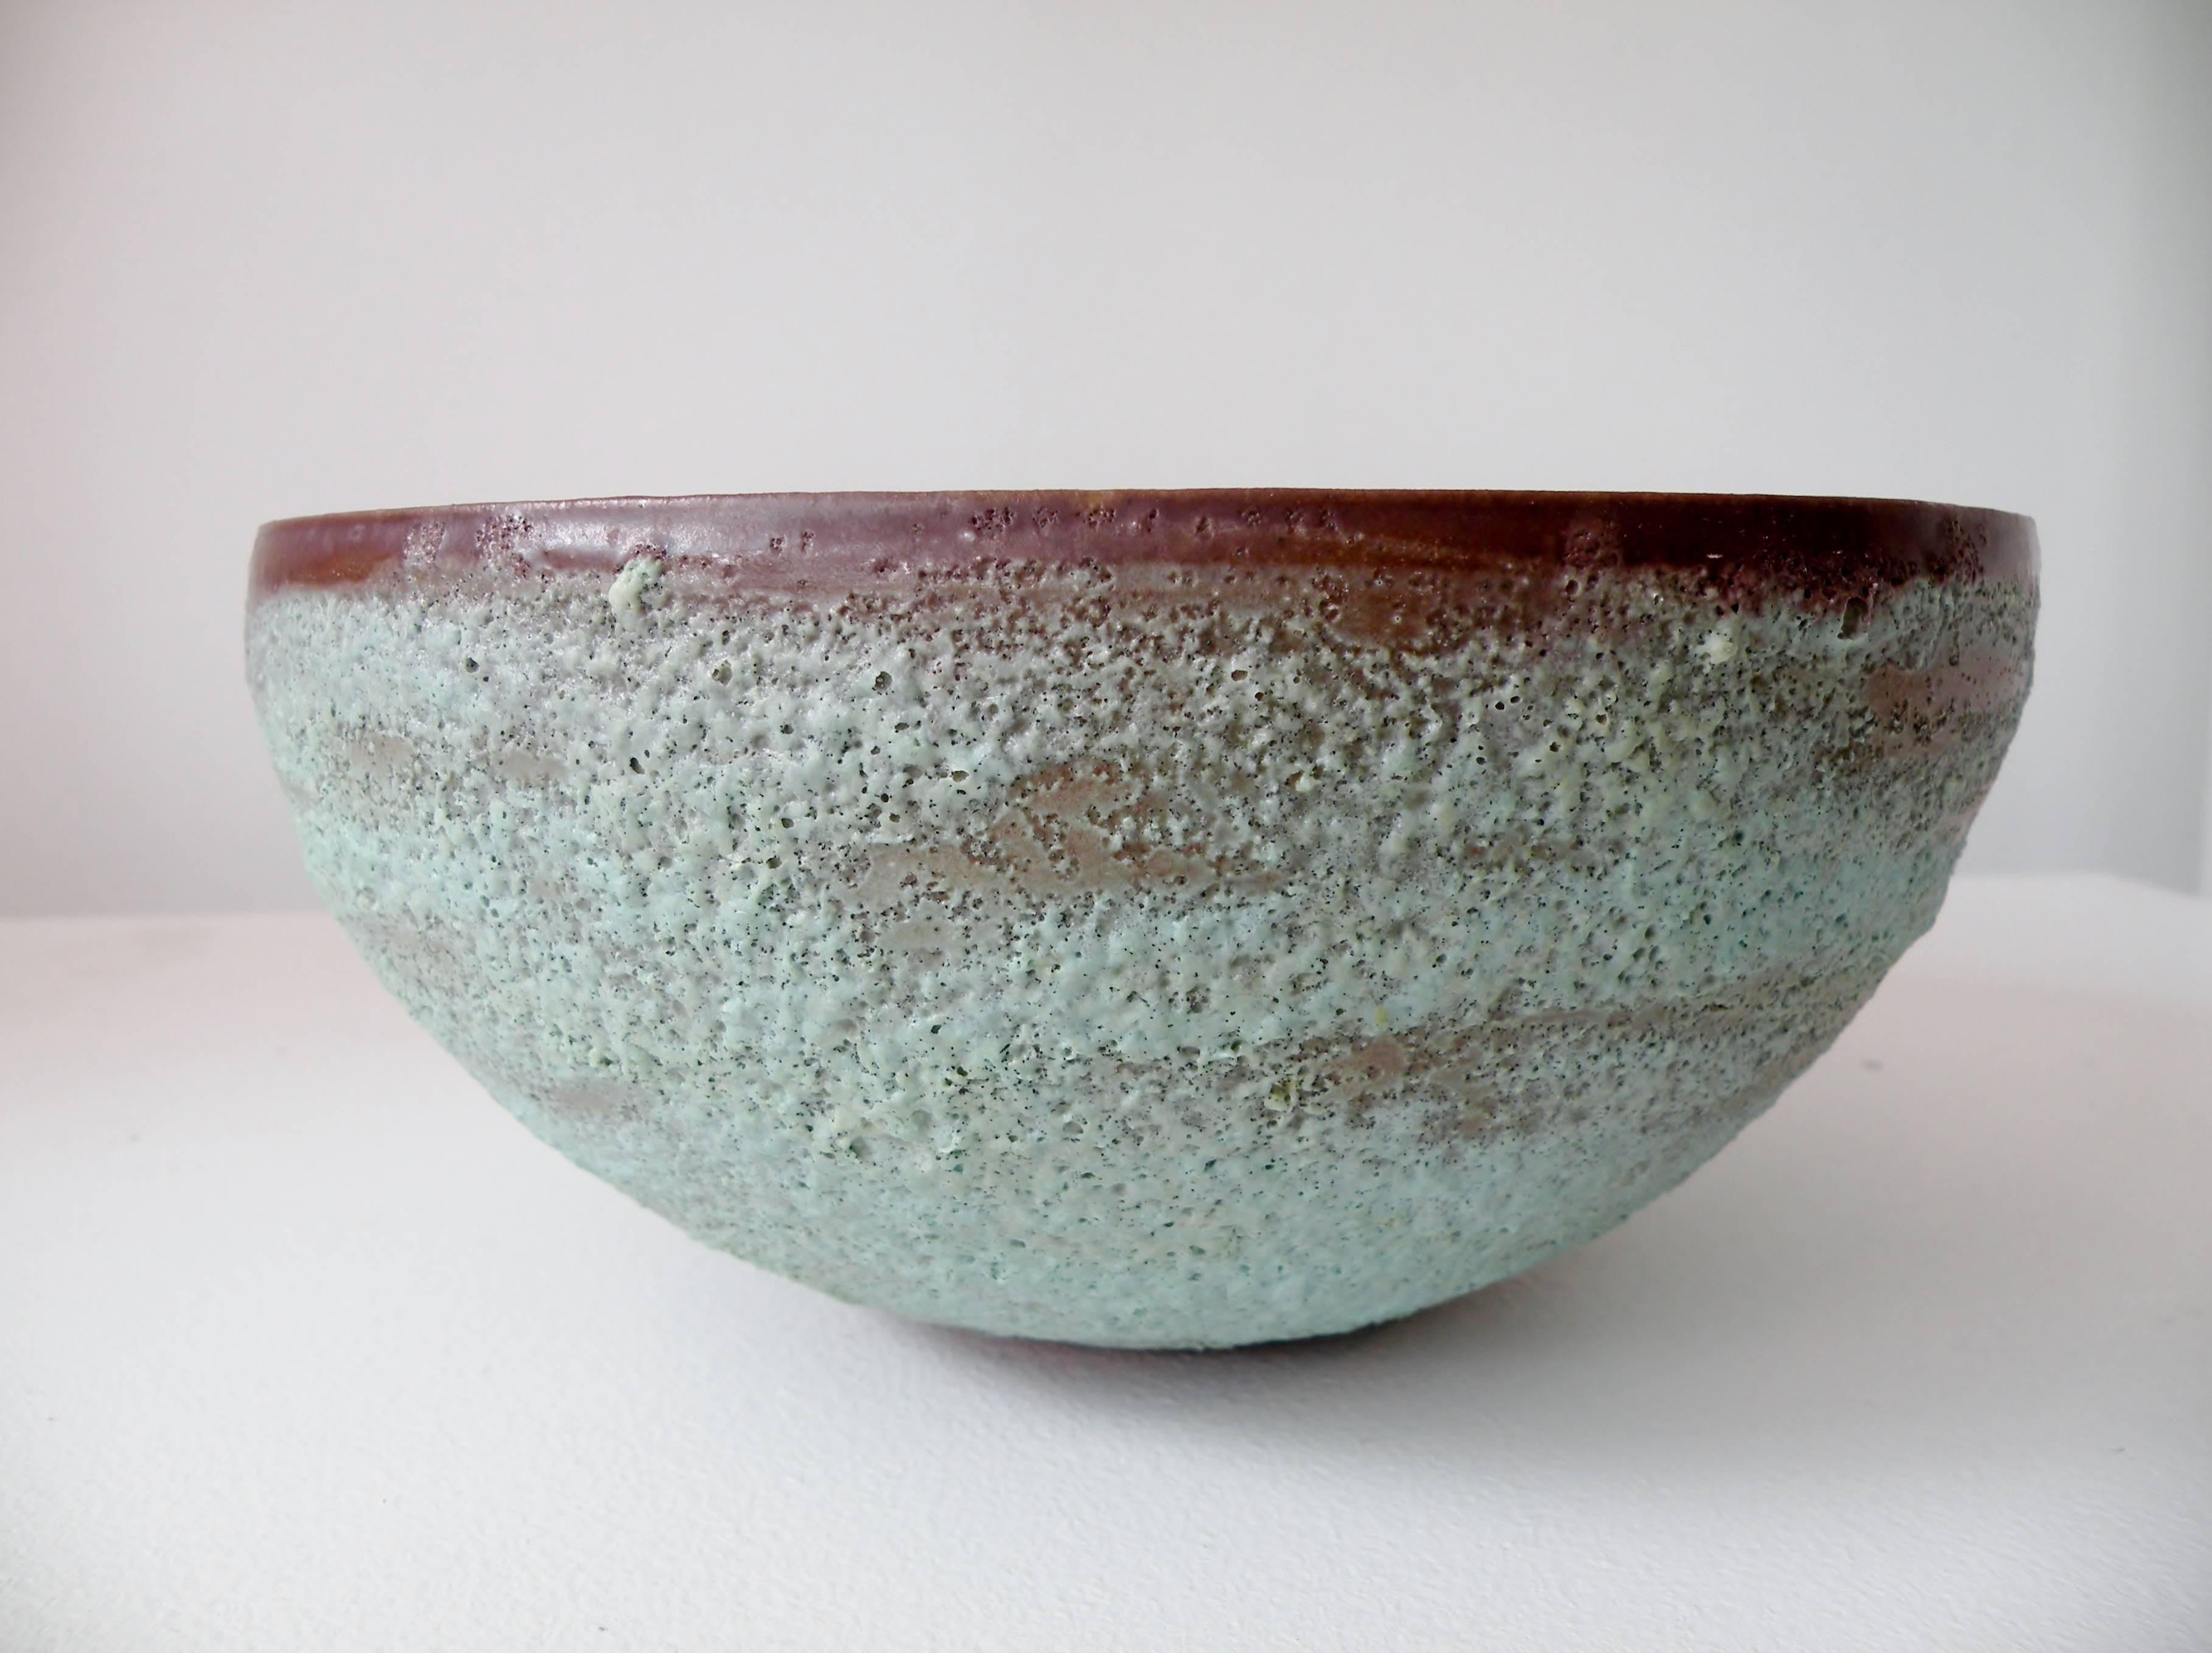 Fine thin walled pottery bowl with verdigris volcanic glaze from renowned Ojai, California potter Beatrice Wood. Approx. 9